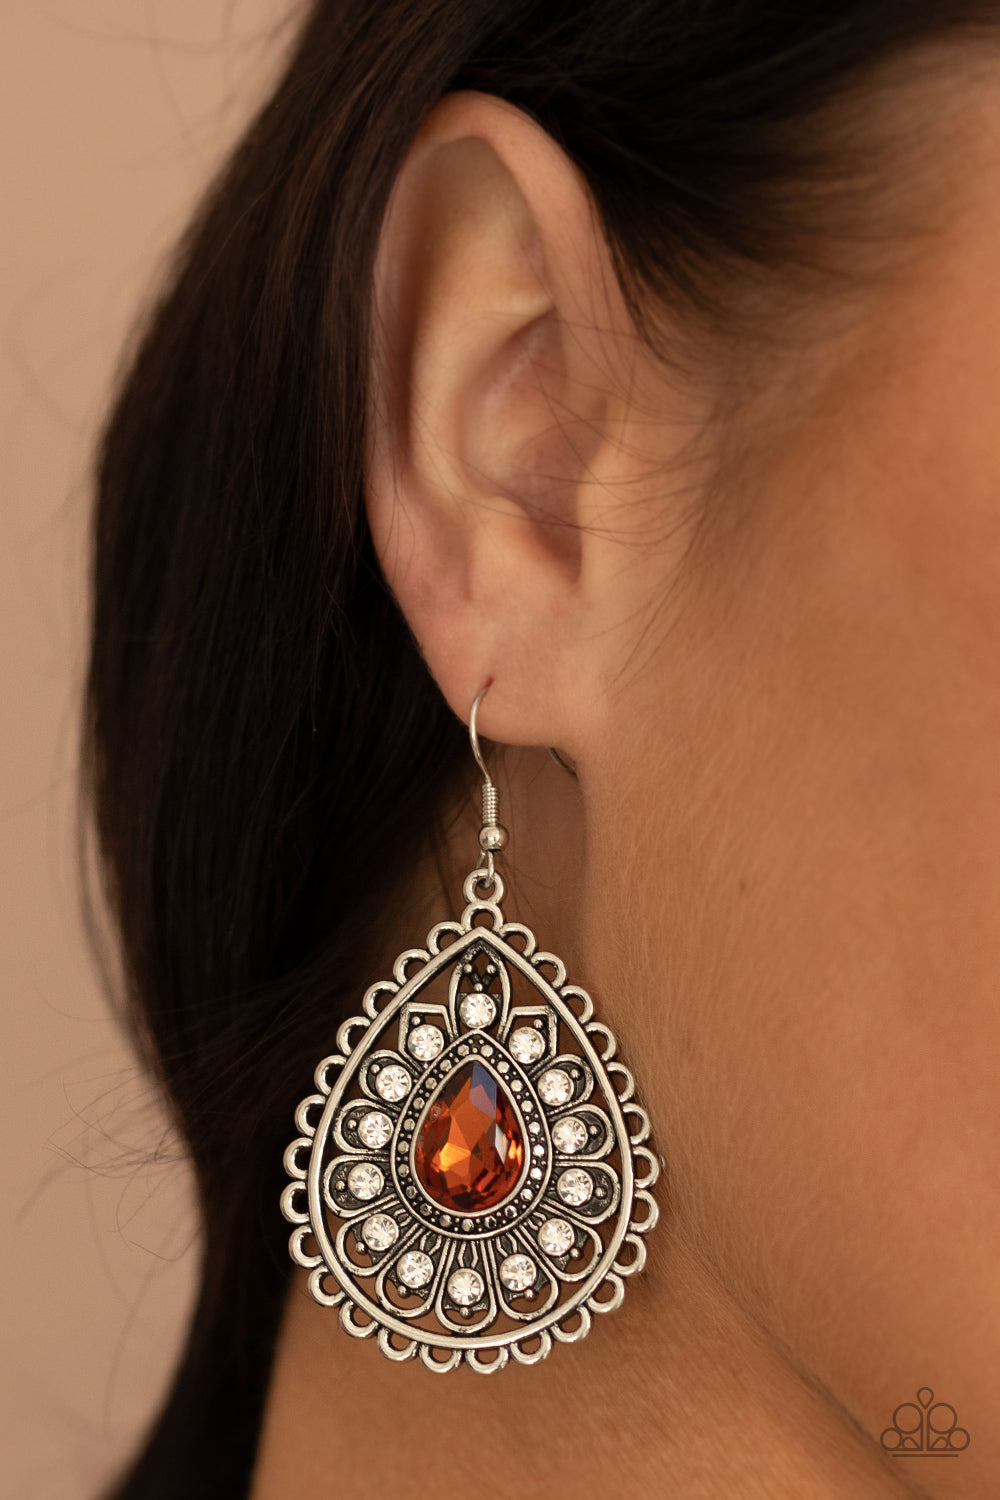 Eat, Drink, and BEAM Merry - Brown Topaz and Silver Earrings - Paparazzi Accessories - White rhinestone dotted silver petals flare out from a topaz teardrop rhinestone center, coalescing into a frilly frame. Earring attaches to a standard fishhook fitting. Sold as one pair of earrings.